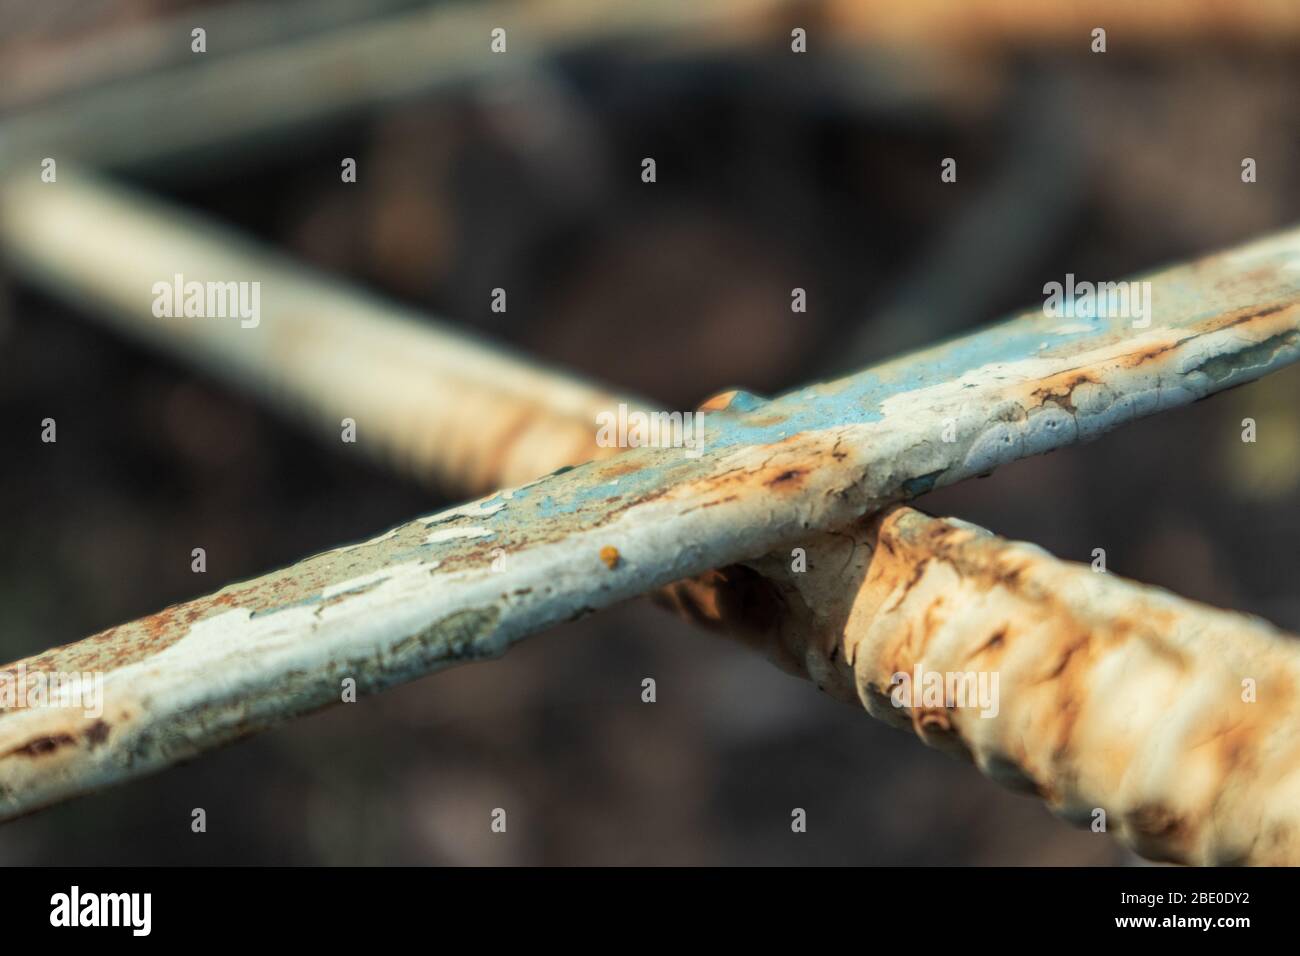 Old blue paint weathered rusty rough metal rods material details macro close-up background Stock Photo